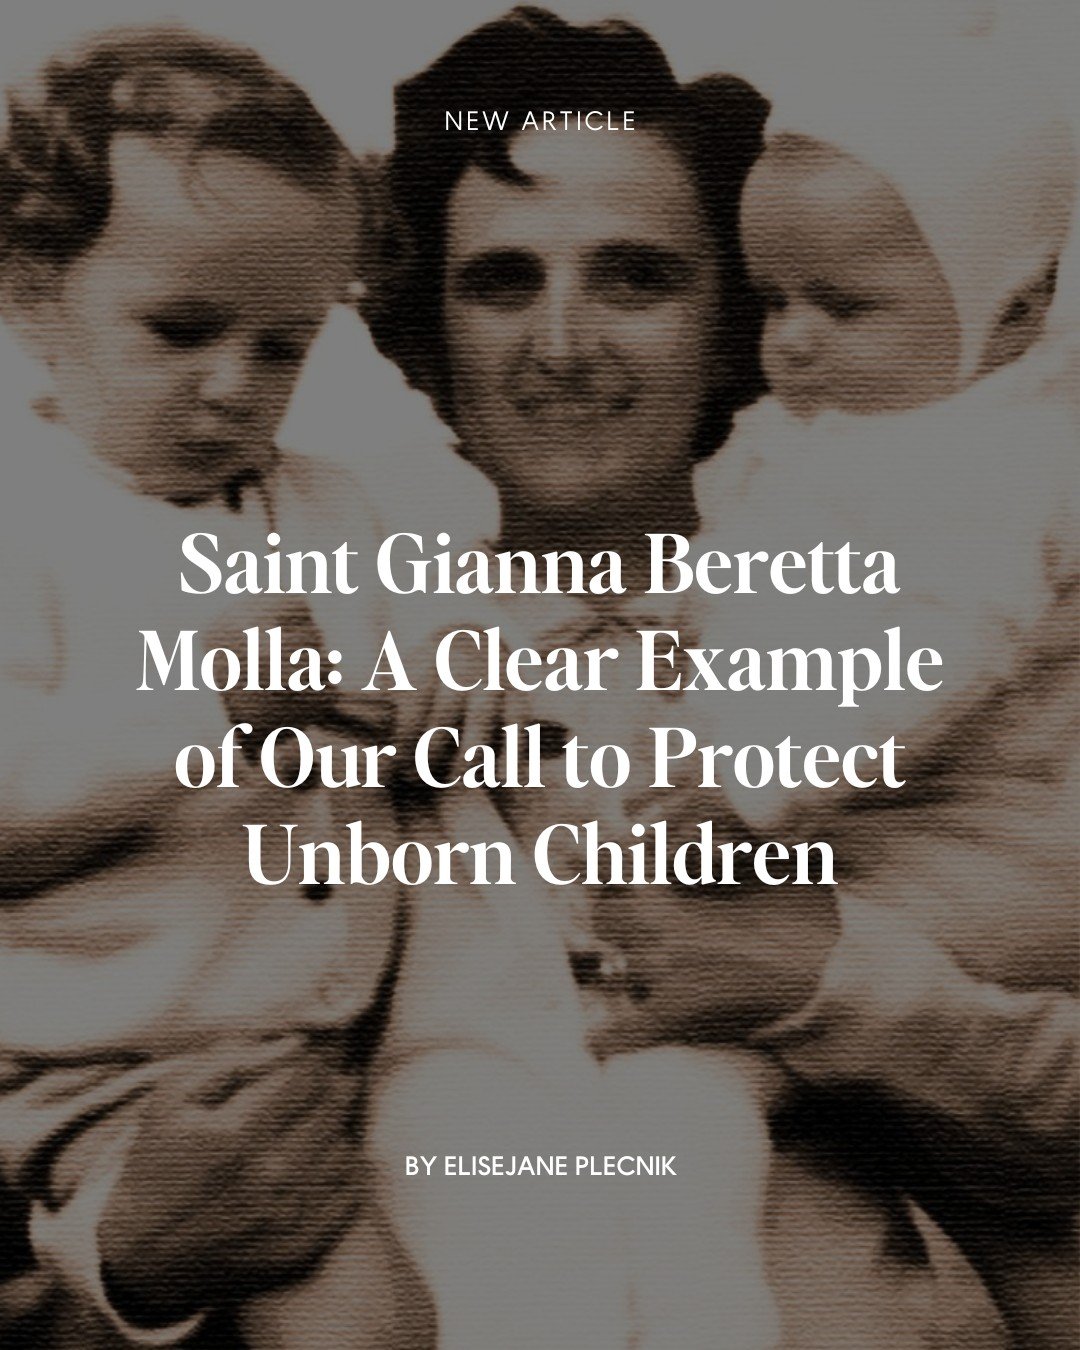 &quot;St. Gianna accomplished God&rsquo;s work for her in less than 40 years of life, living Jesus&rsquo; greatest commandments (Mark 12:28-34) with fervent charity. She had vocations as a pediatrician, wife, mother, and saint, and each role shows he